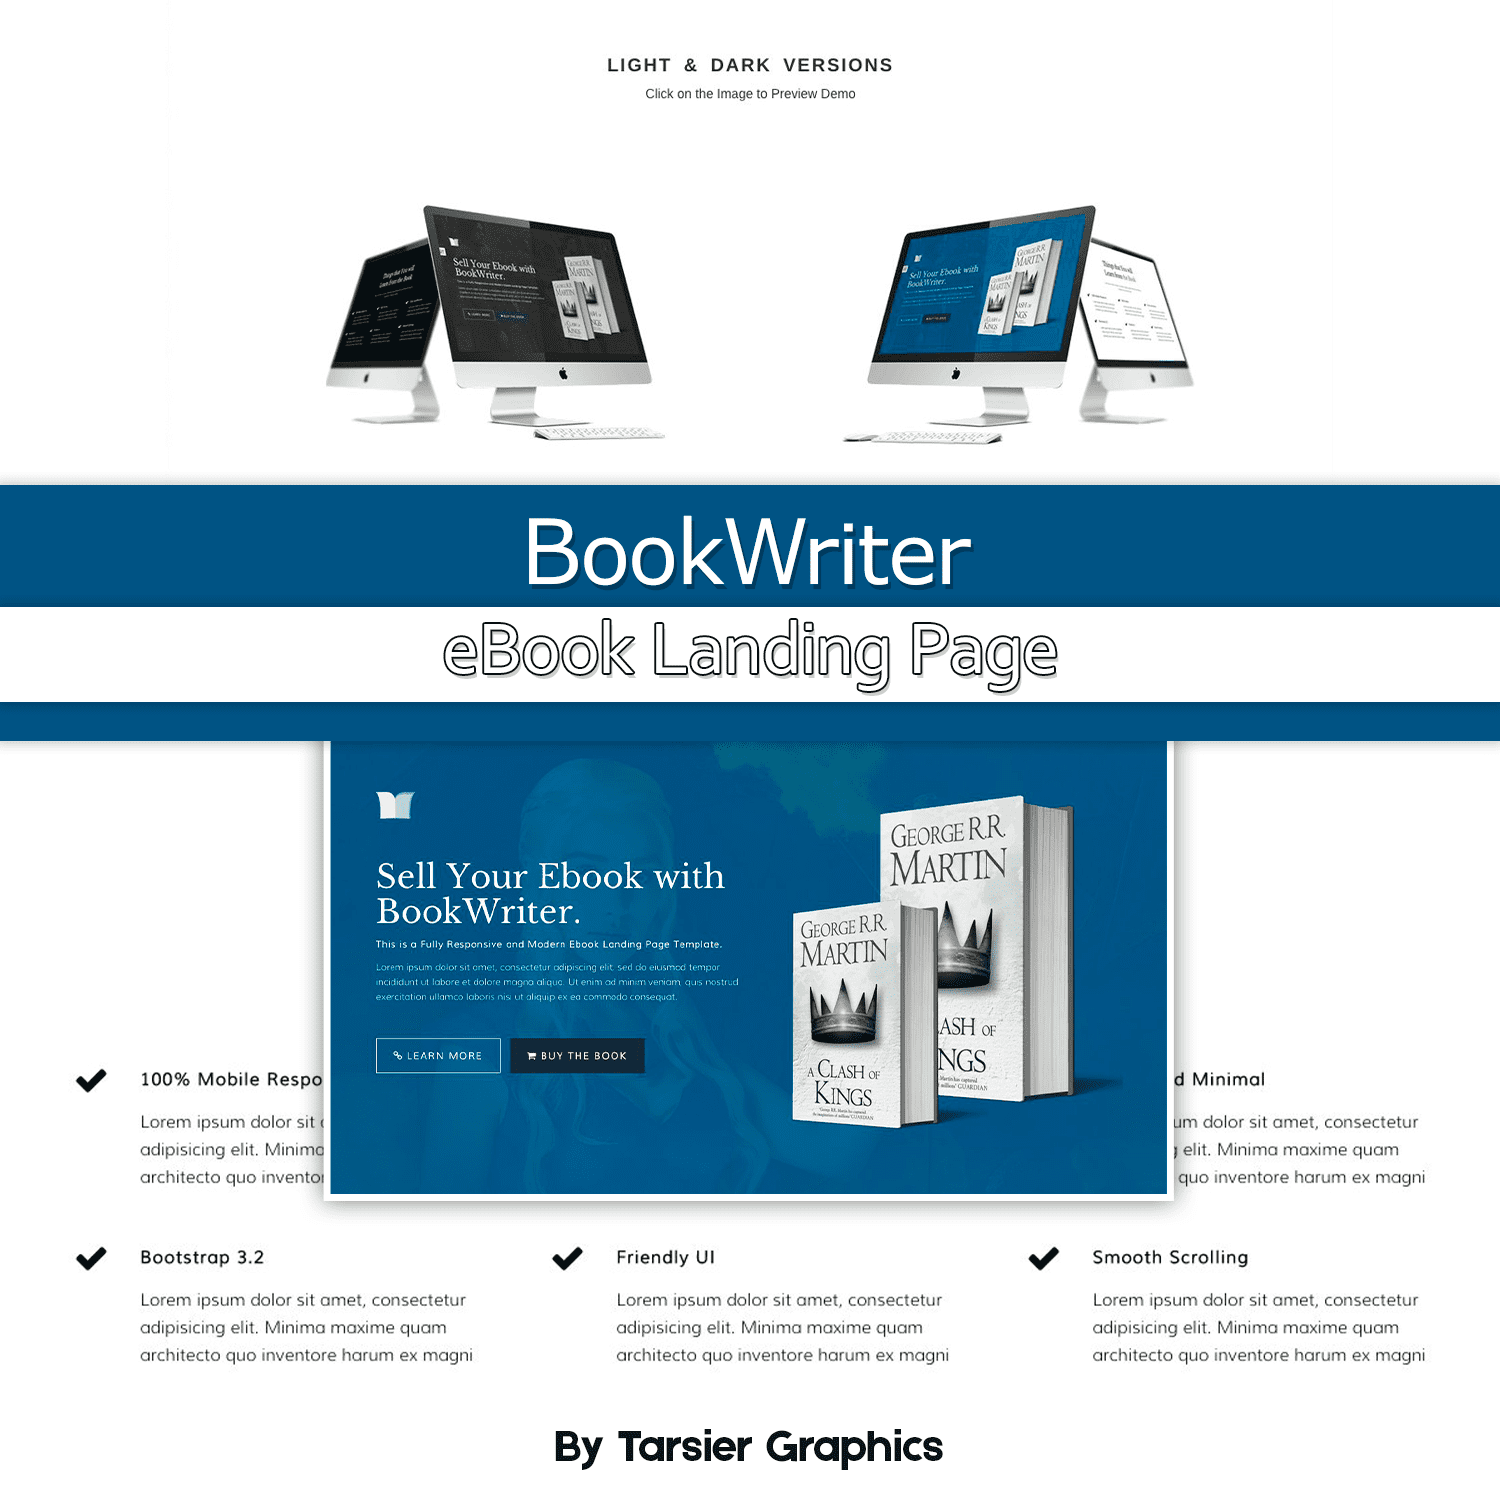 BookWriter - eBook Landing Page cover.